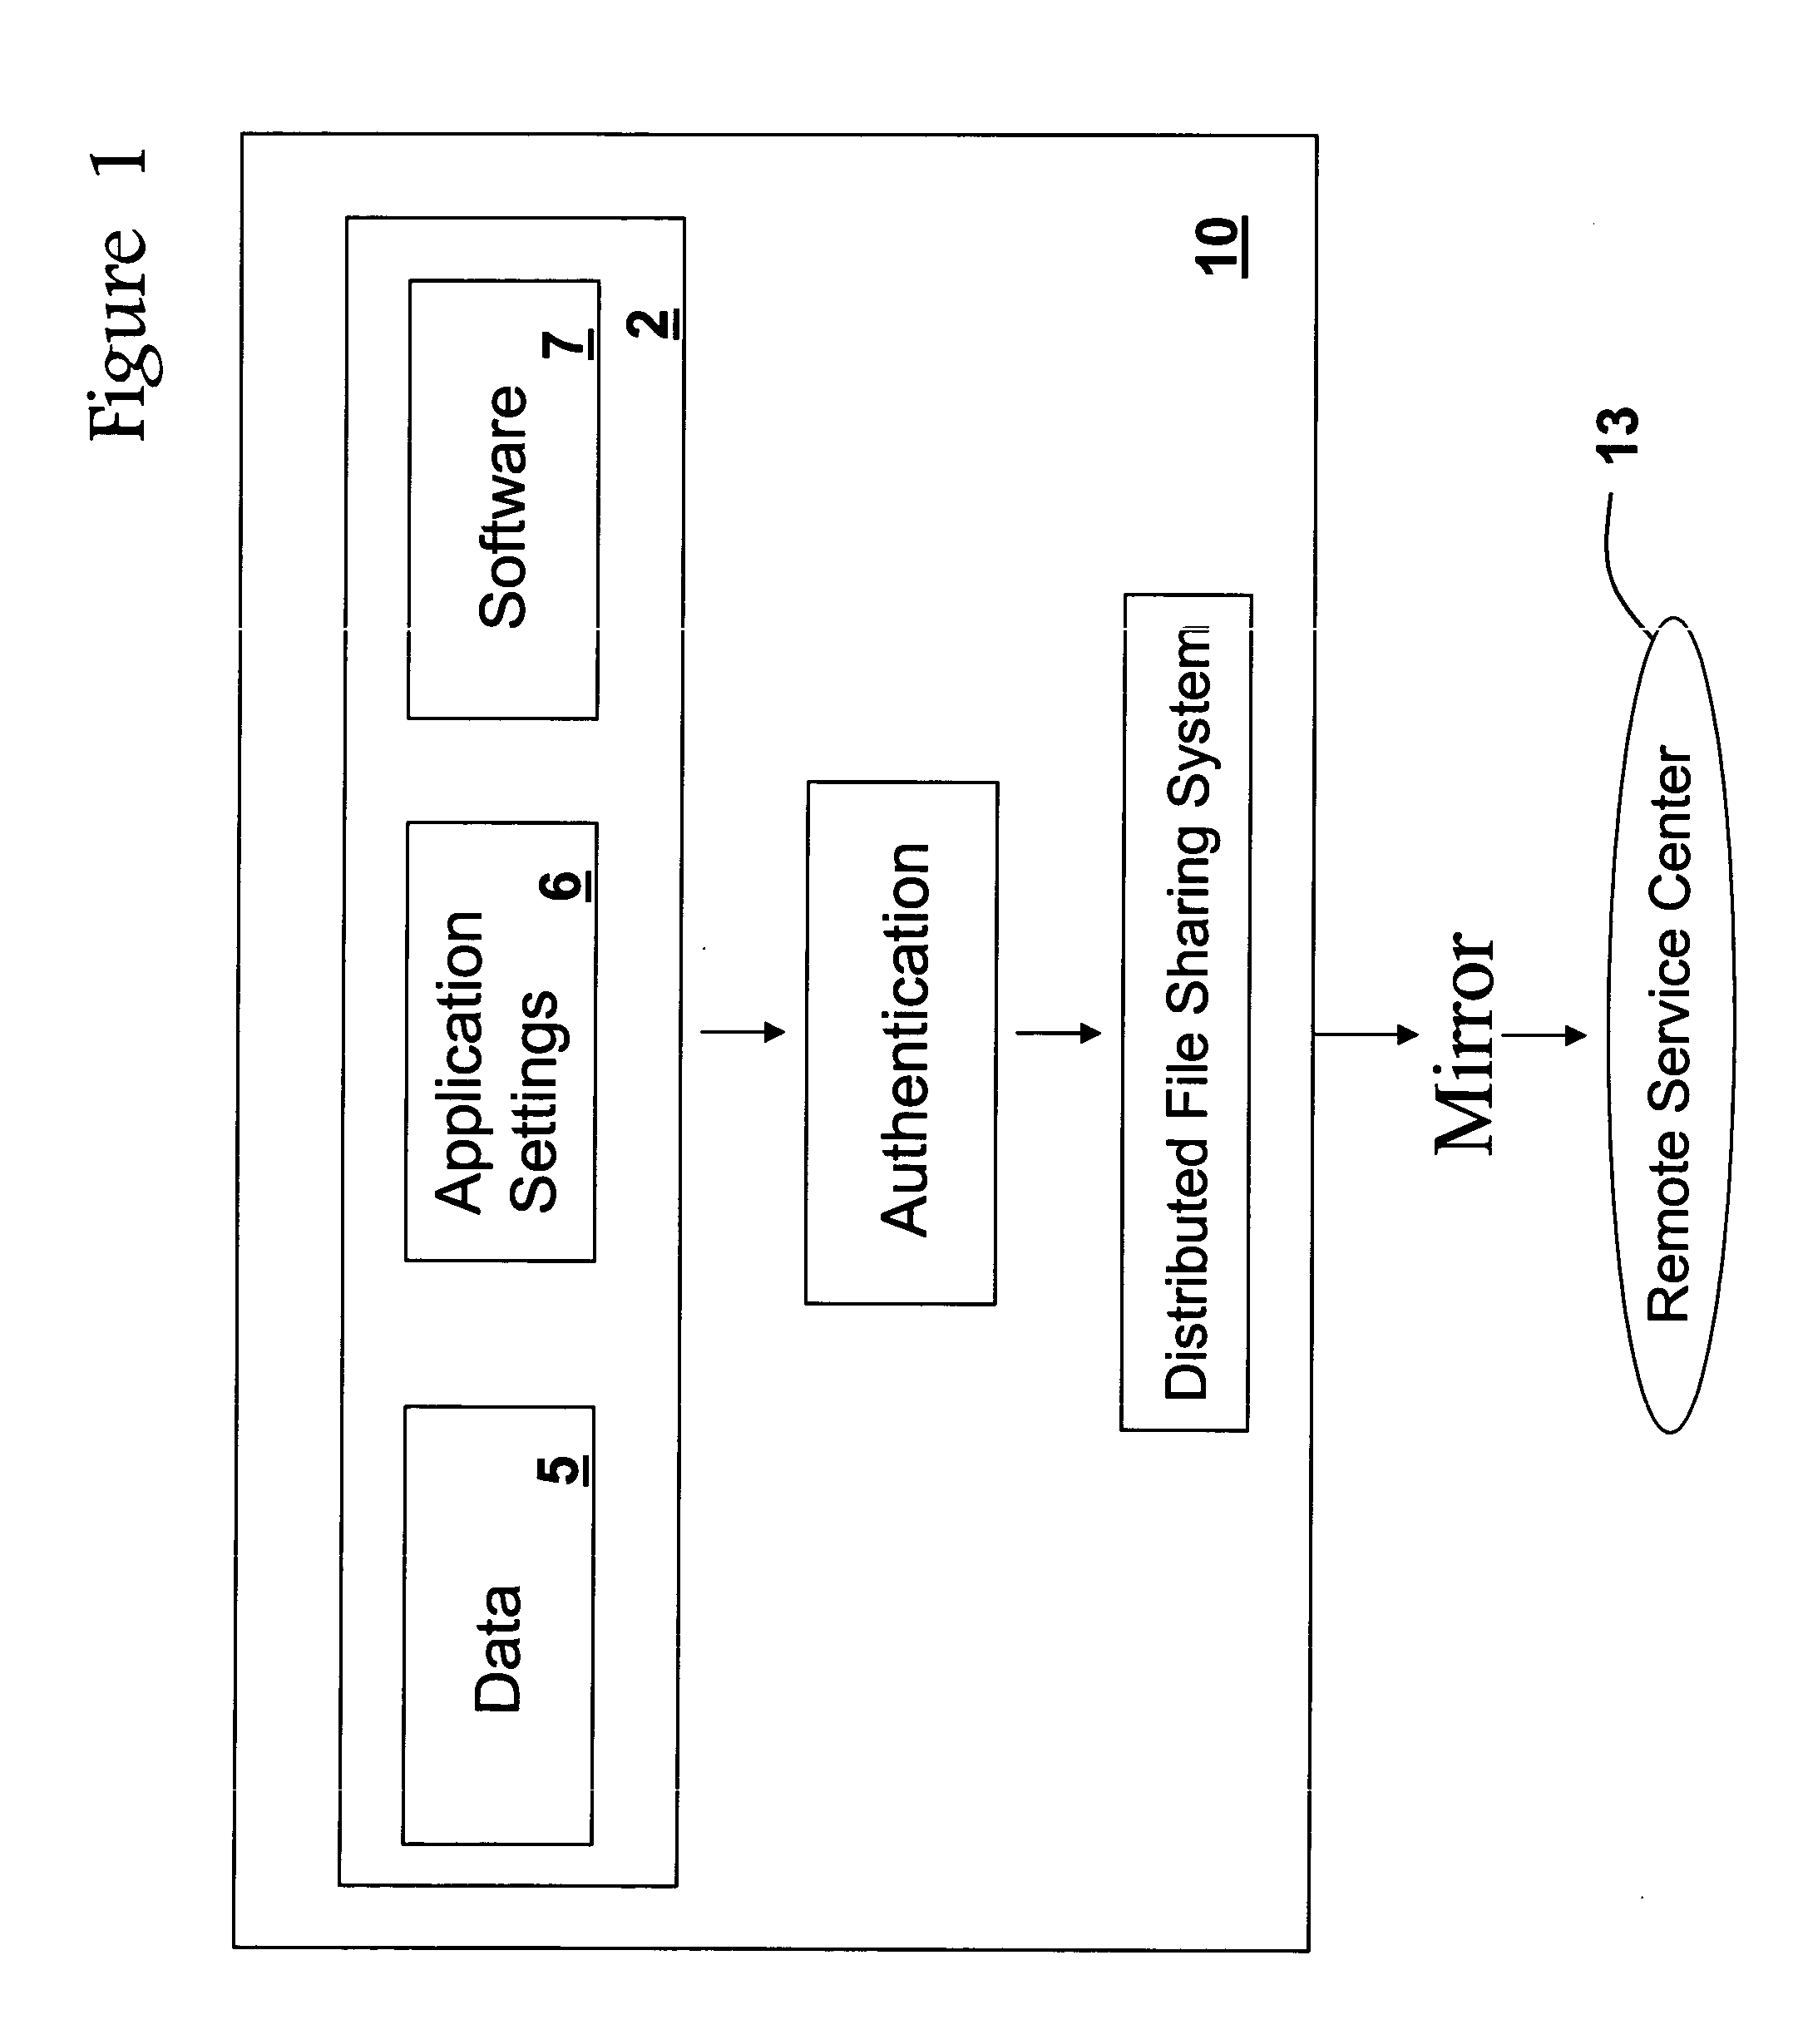 Method for electronically packaging a user's personal computing environment on a computer or device, and mobilizing it for transfer over a network